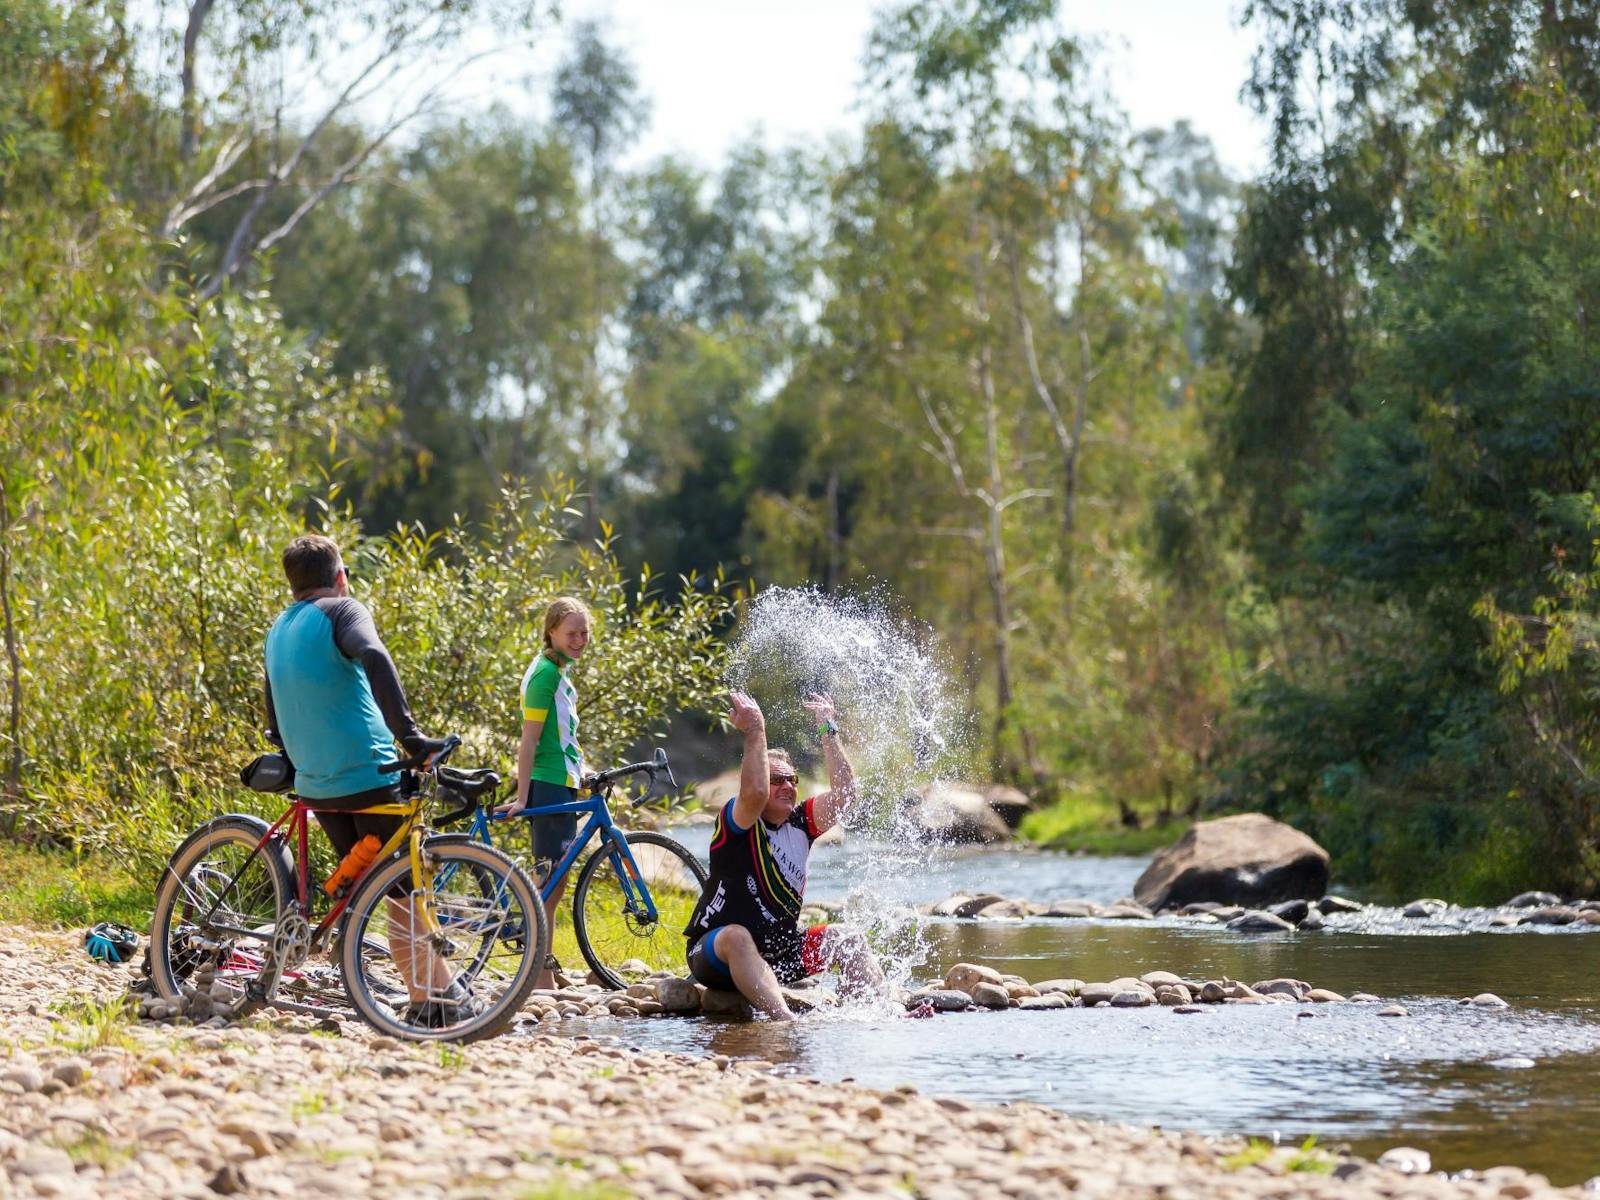 Gravel Road Bikes, Cyclists, trees, riverbank, splashing water in the King River